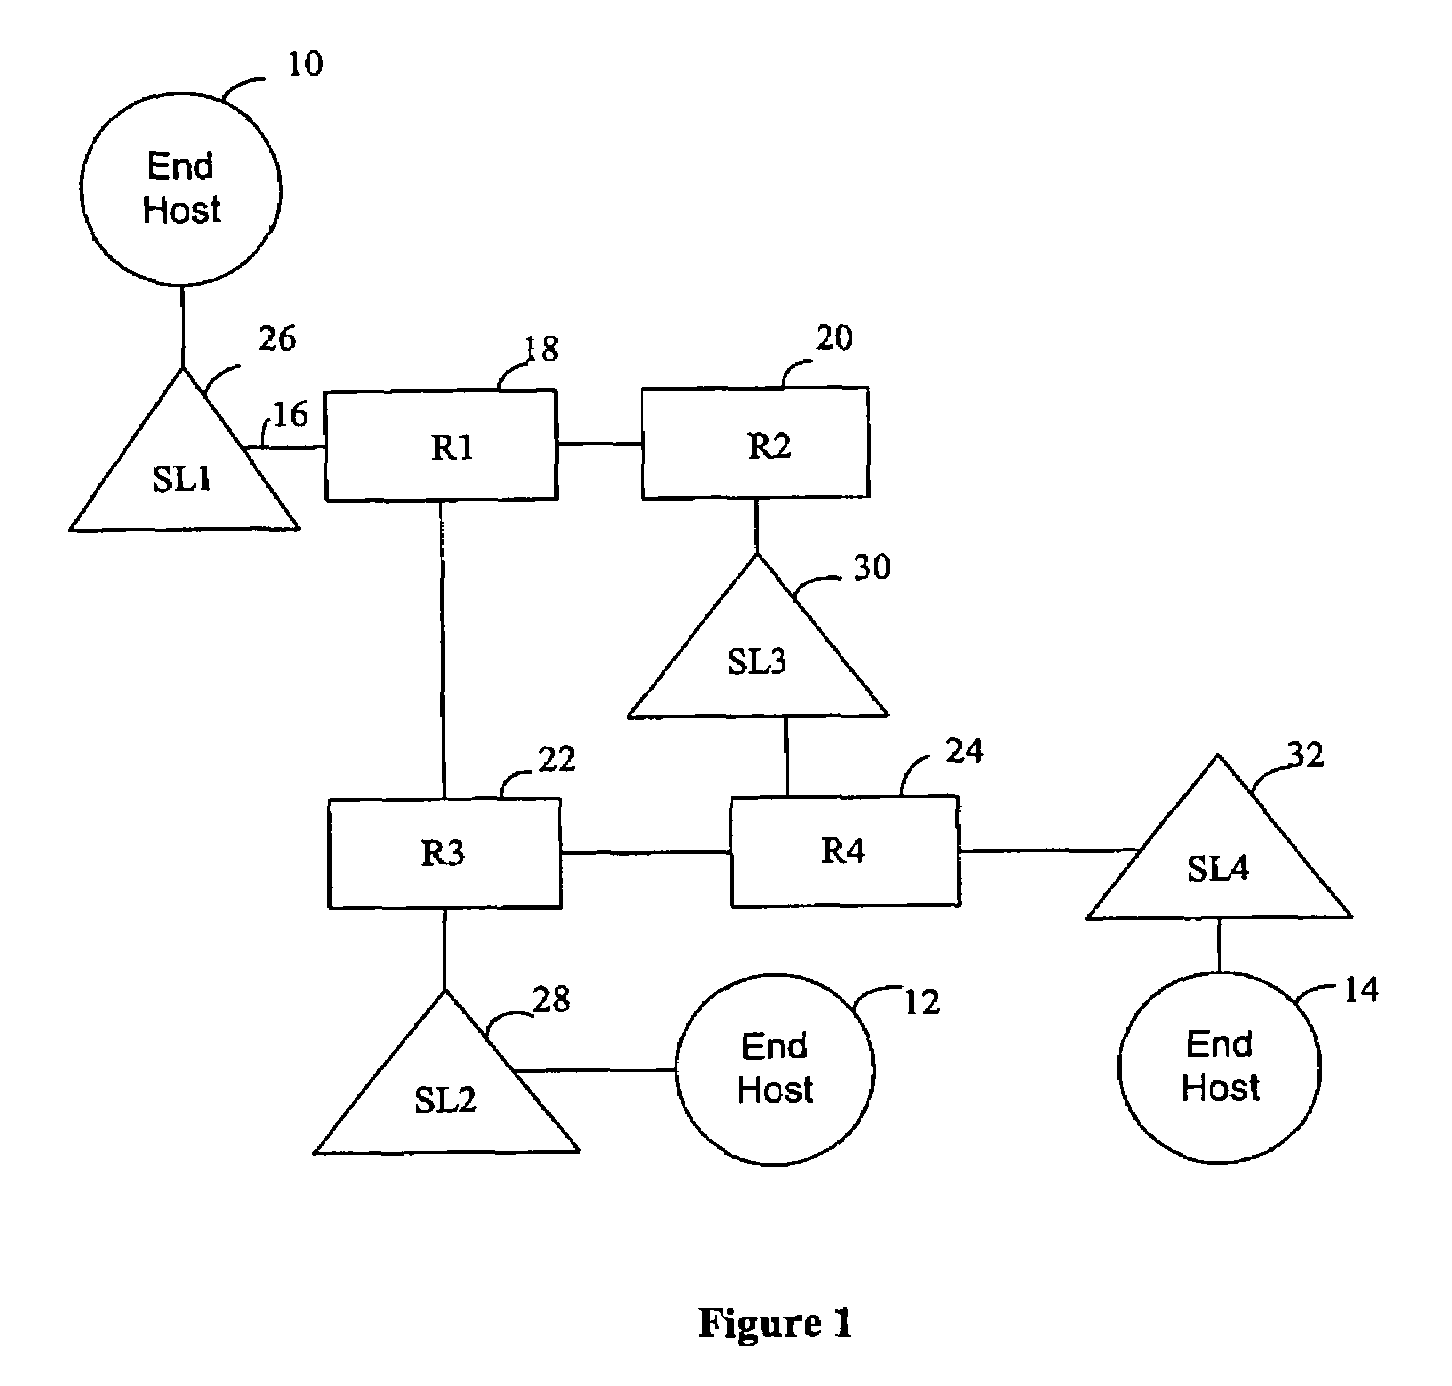 Method and apparatus for discovering network topology